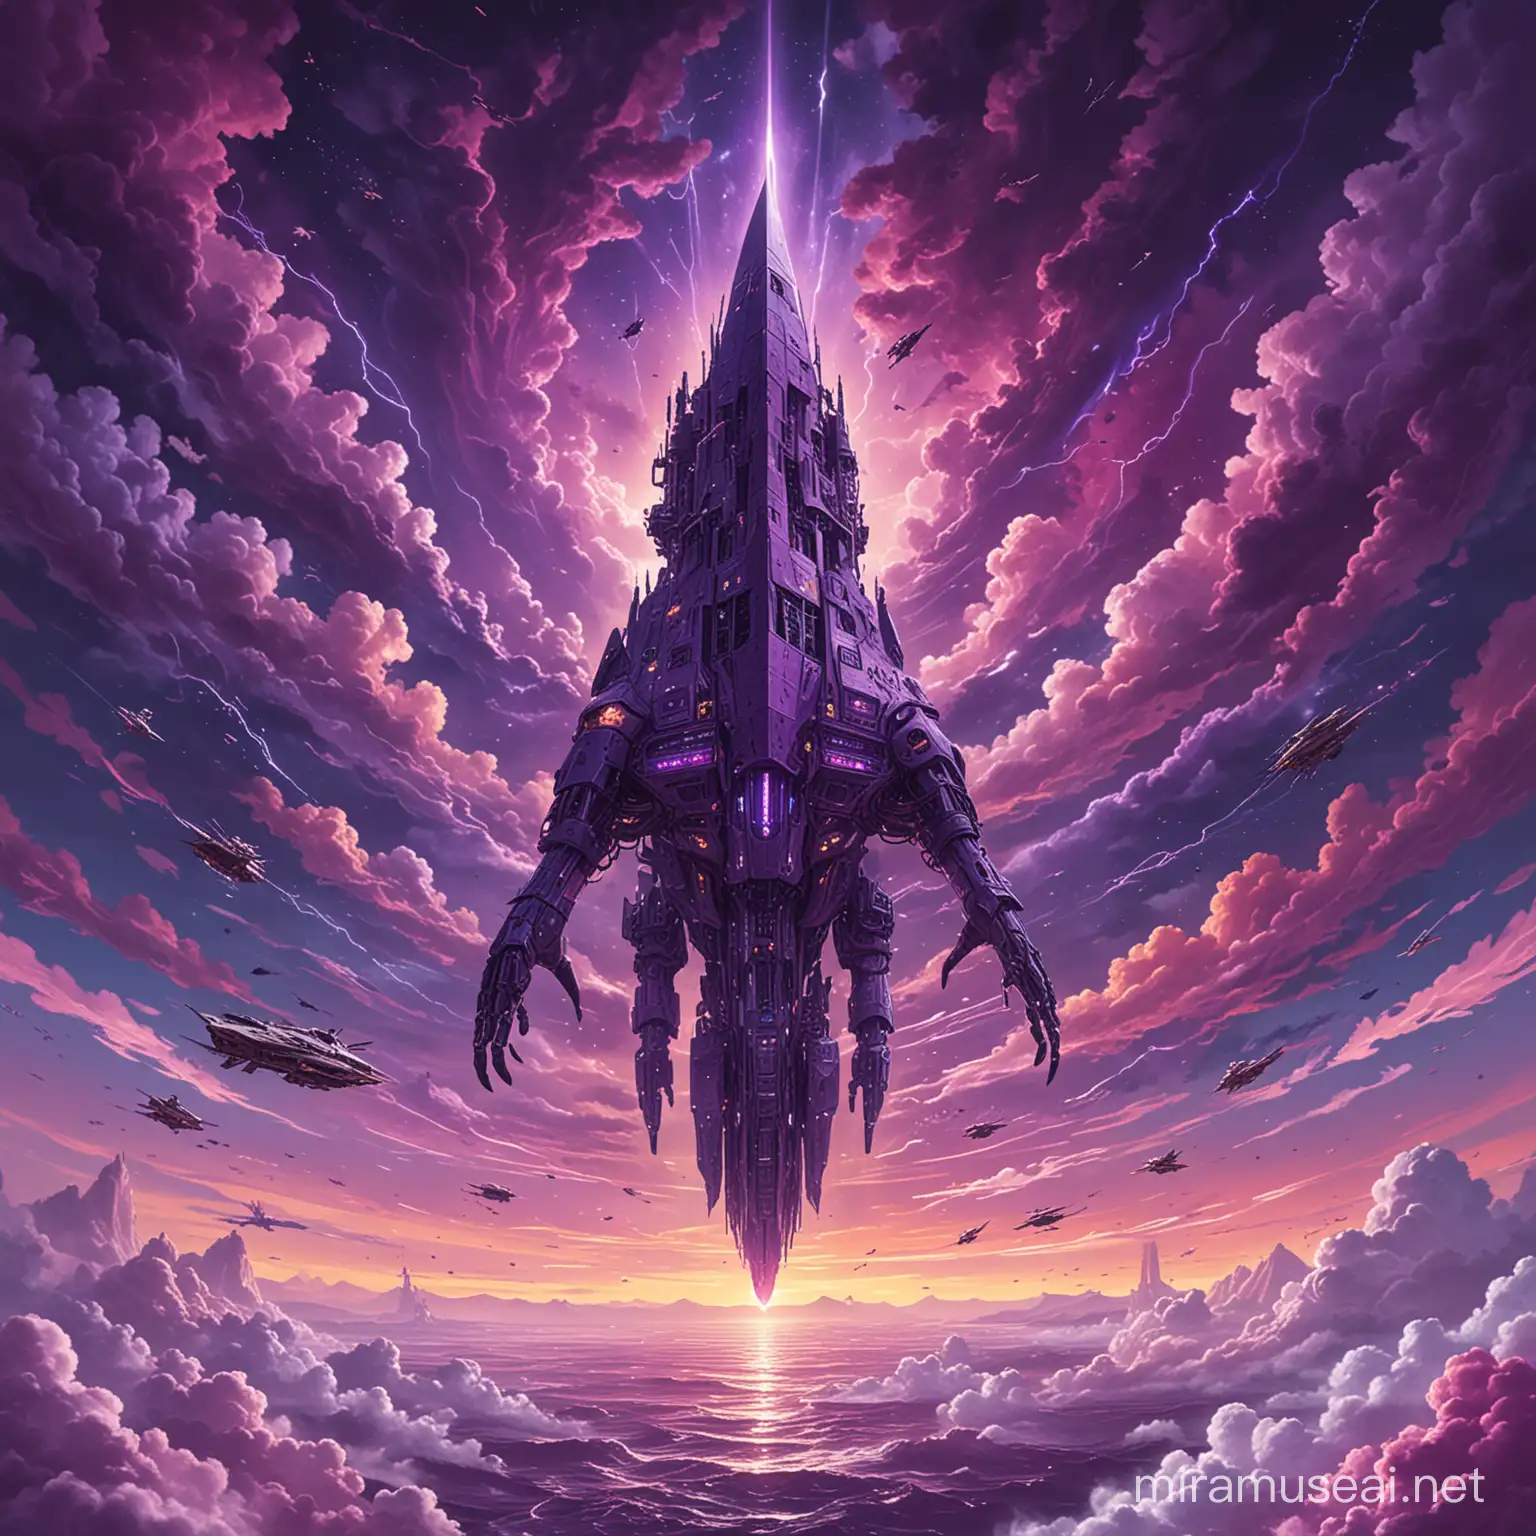 Mysterious Purple Ship with Giant Human Arms Soaring through Multicolored Skies